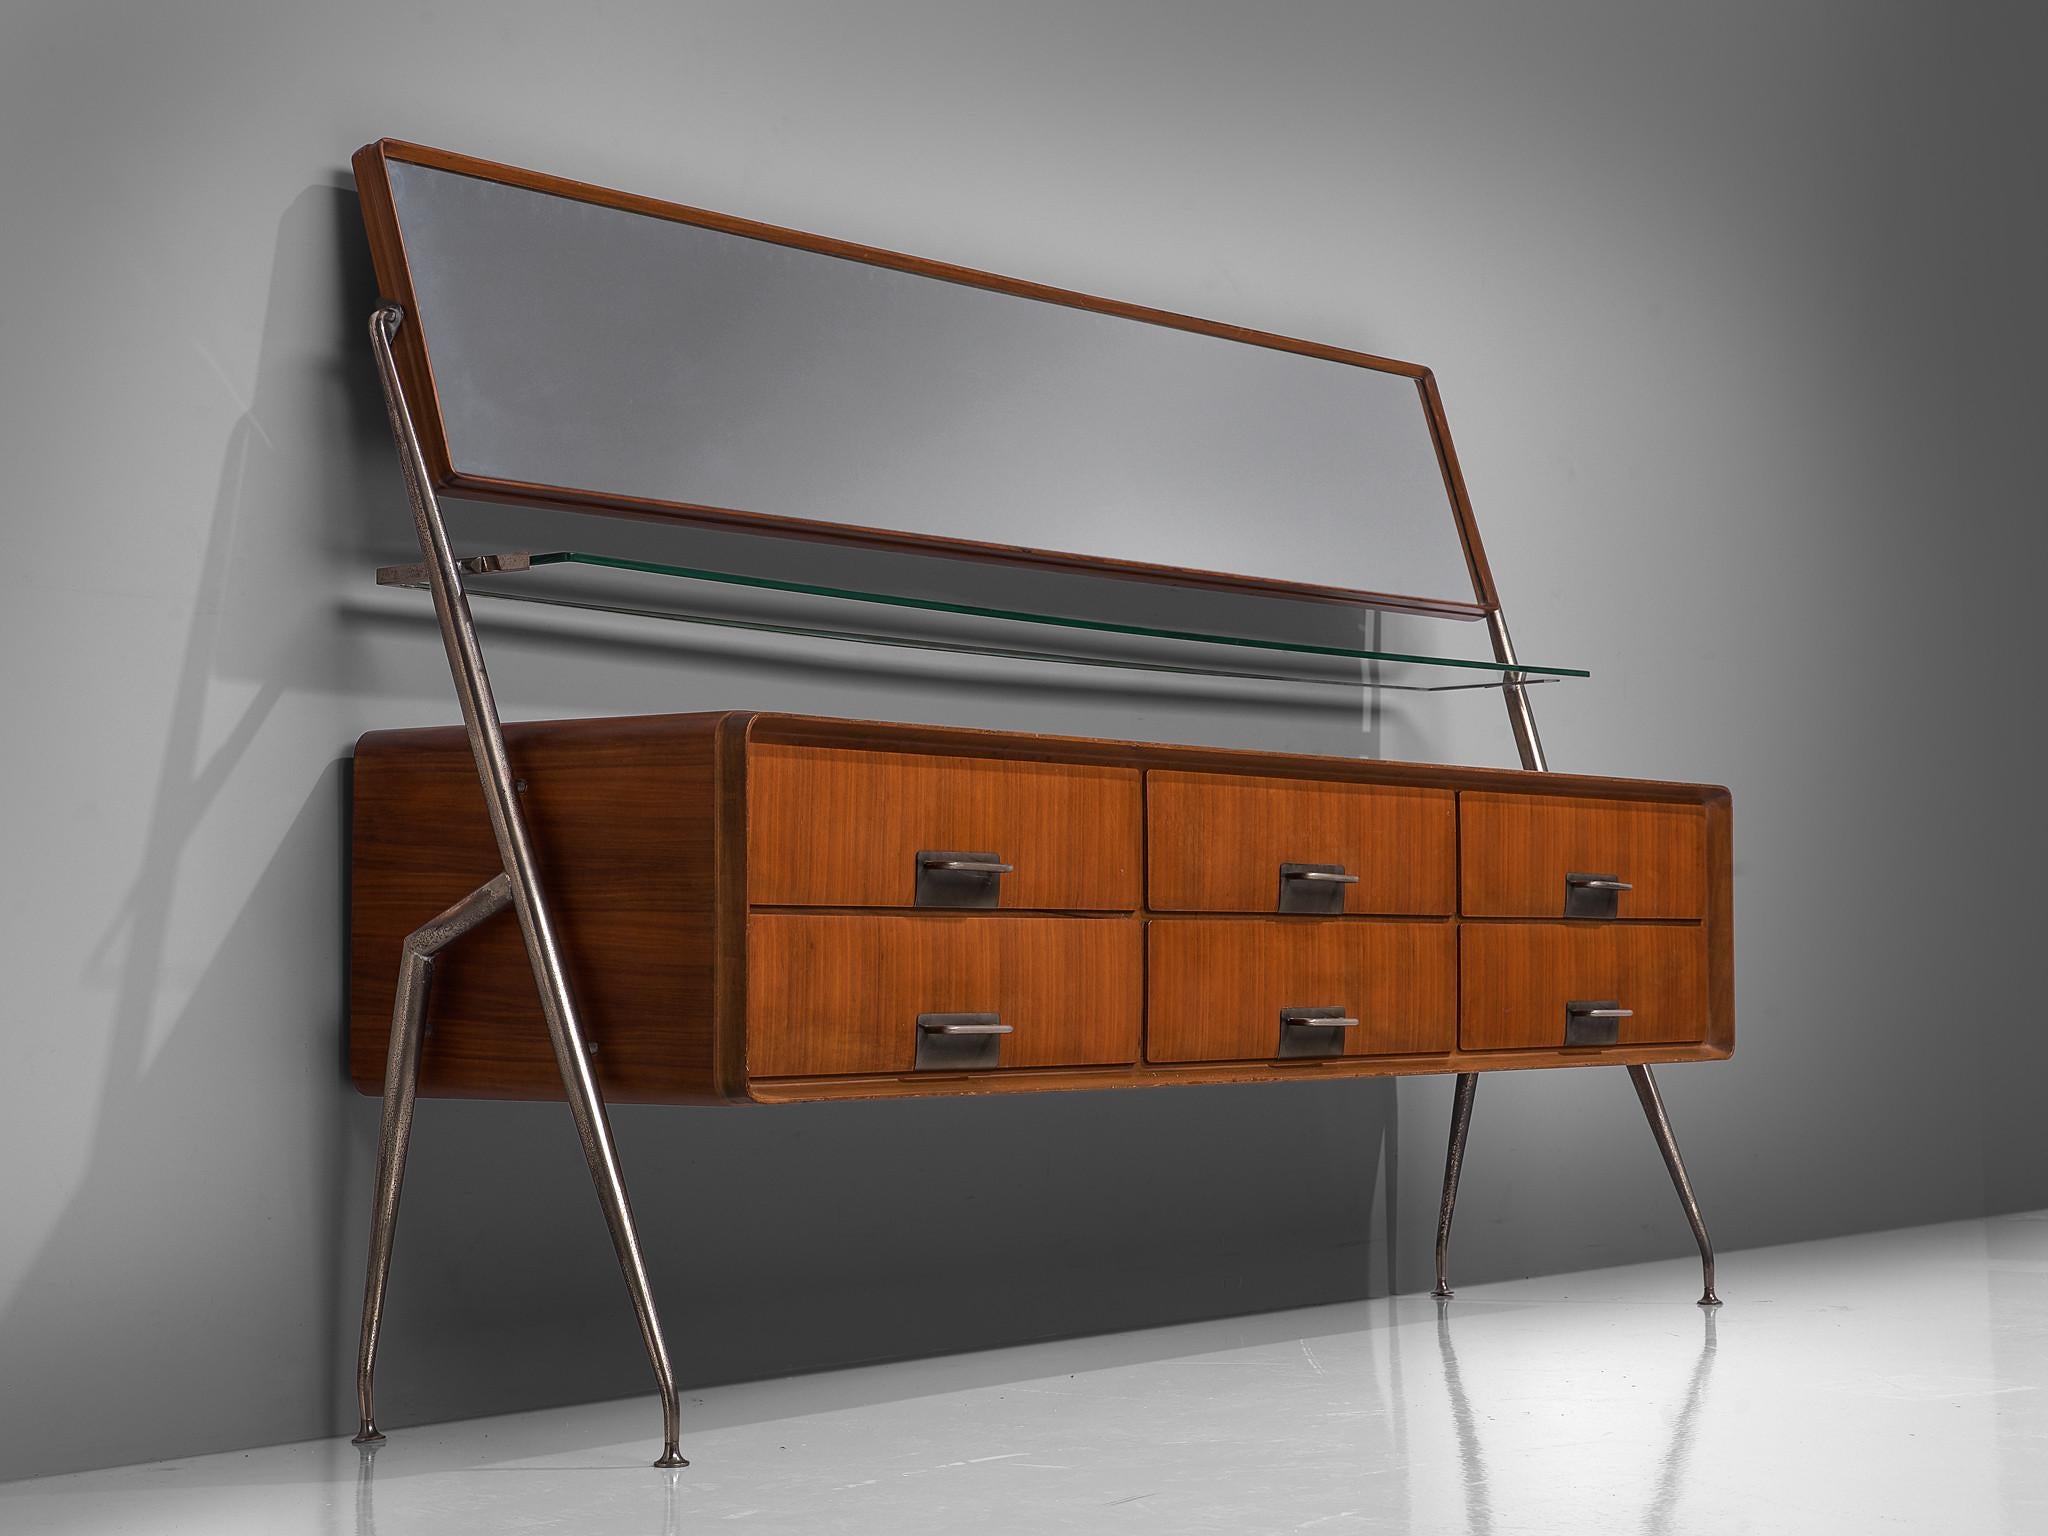 Silvio Cavatorta, sideboard, metal, mahogany and glass, Italy, 1958.

Elegant and rare Italian sideboard by Silvio Cavatorta. This cabinet is equipped with six drawers, a glass shelf and a pivoting mirror with a spanning of 180 cm. The mahogany case